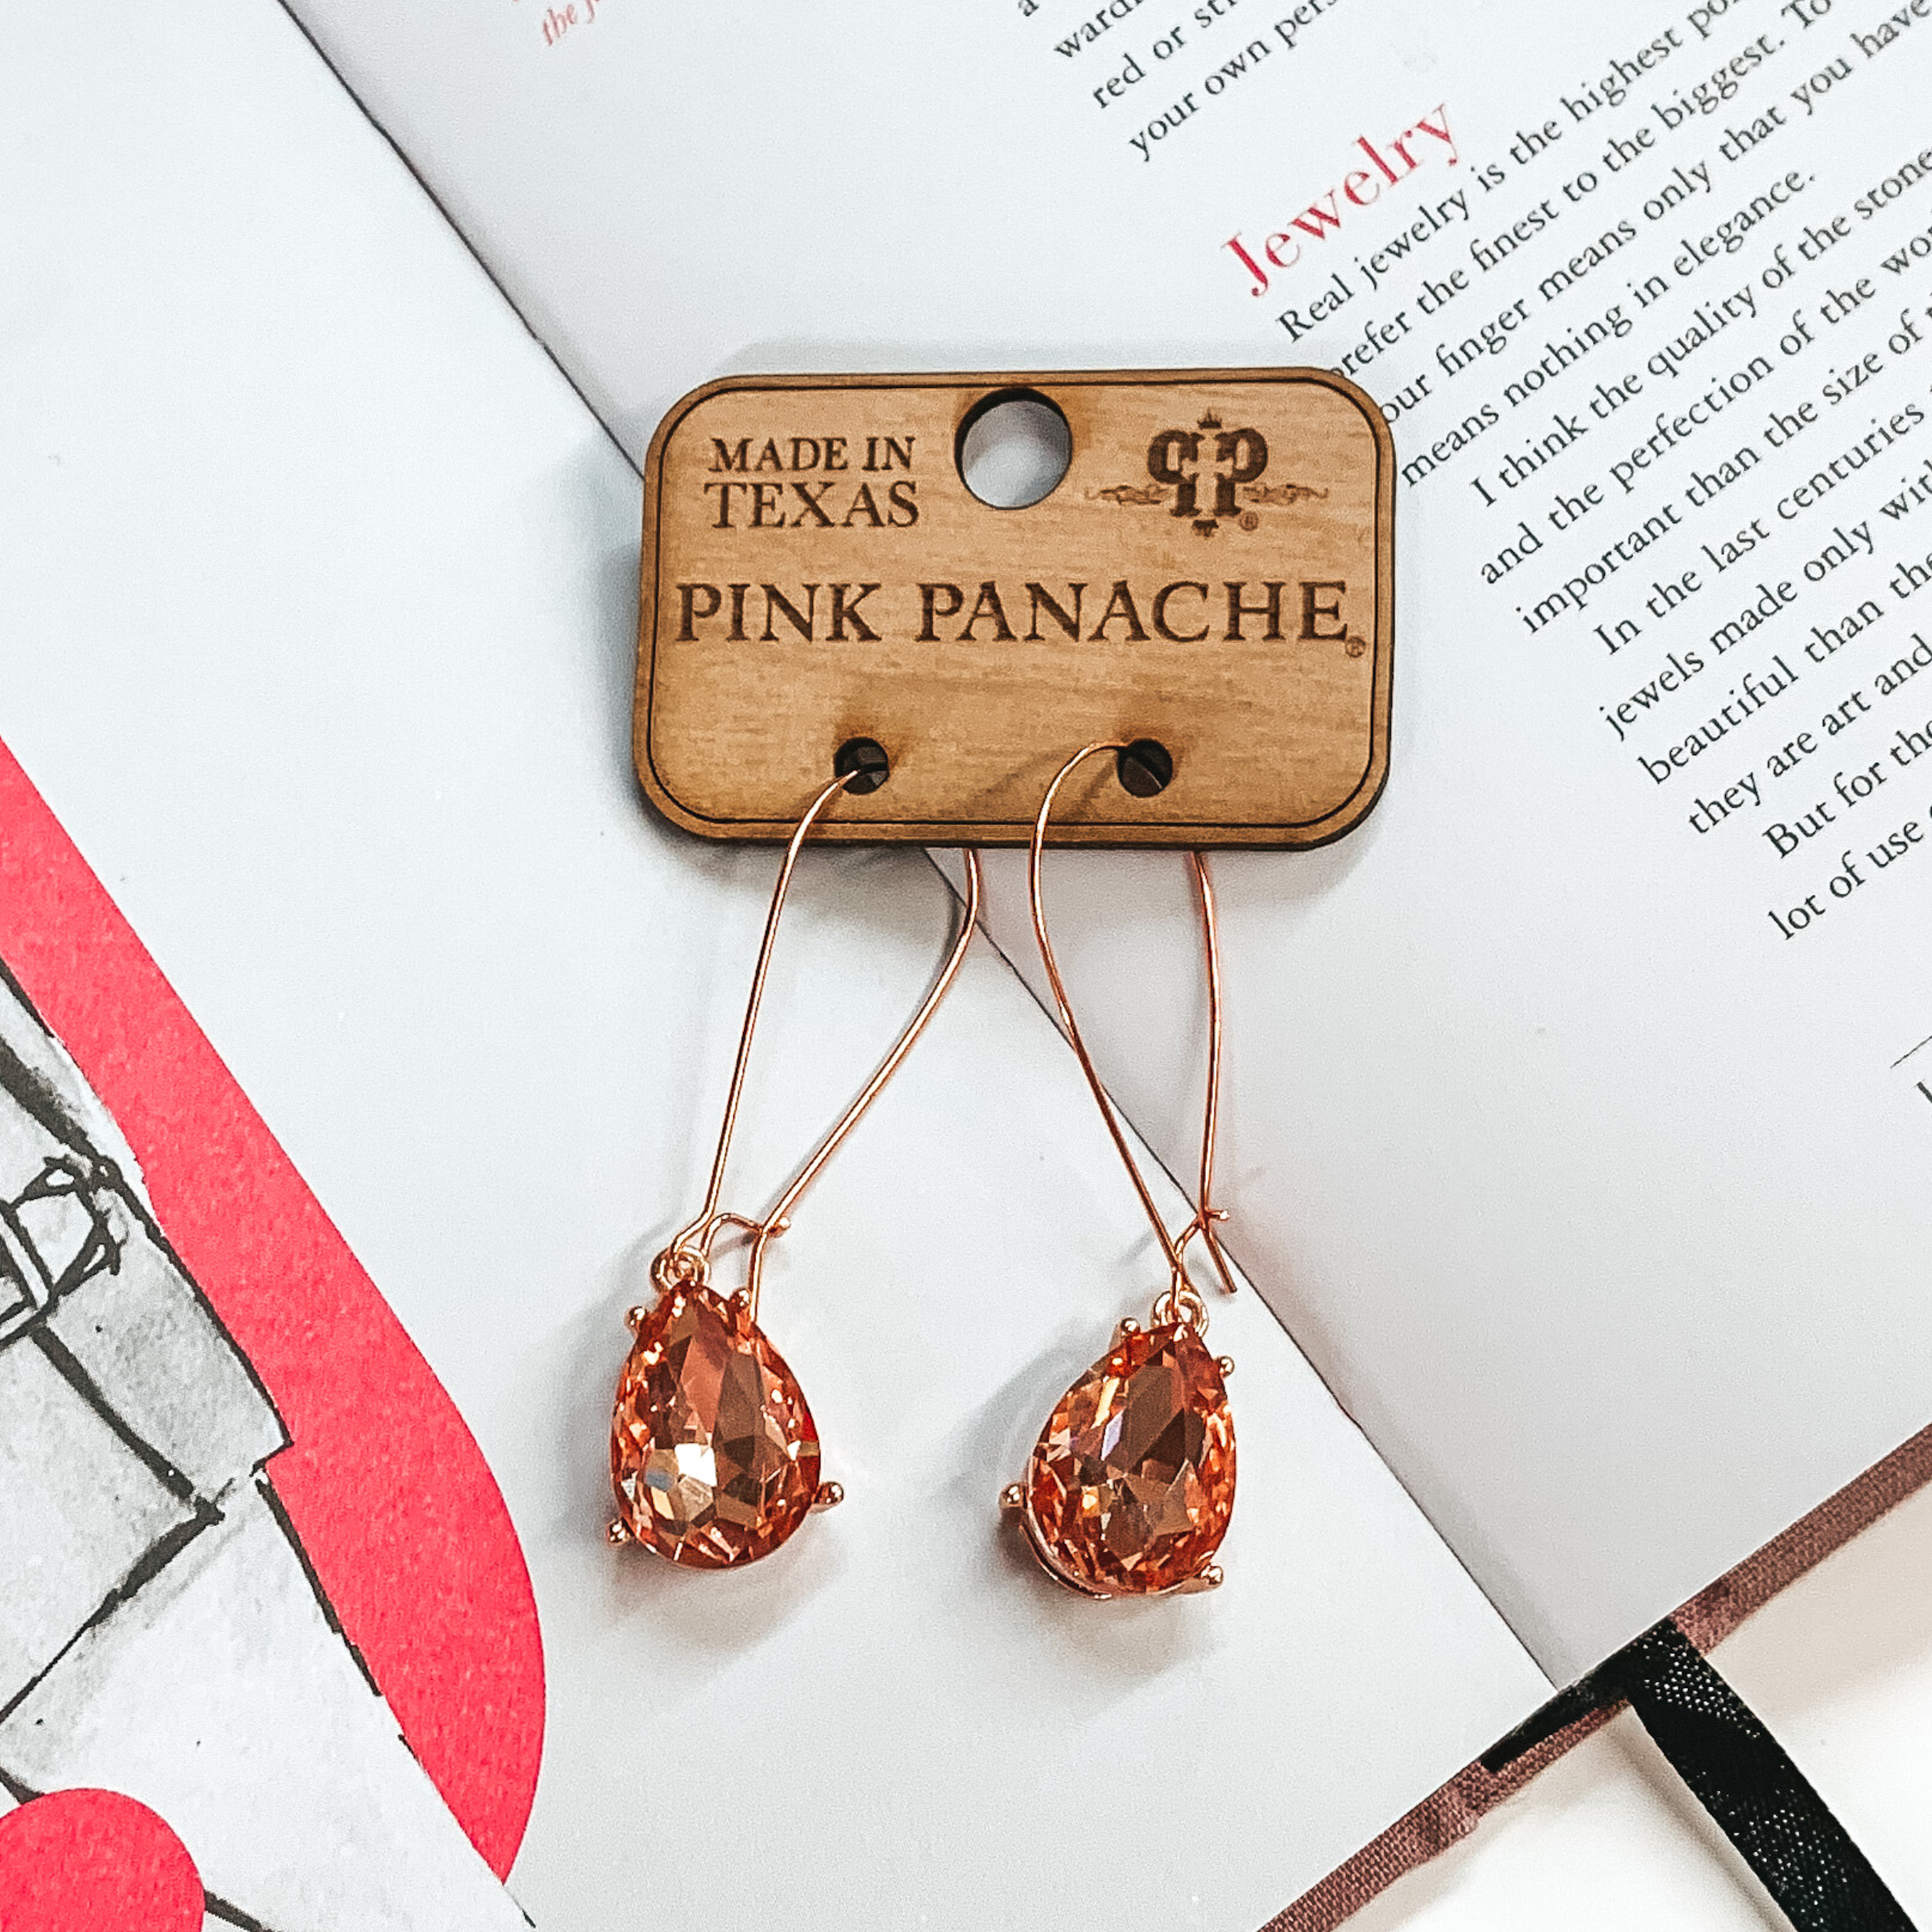 Rose gold kidney wire earrings with a hanging teardrop rose gold crystal pendant. These earrings are pictured on an open book.